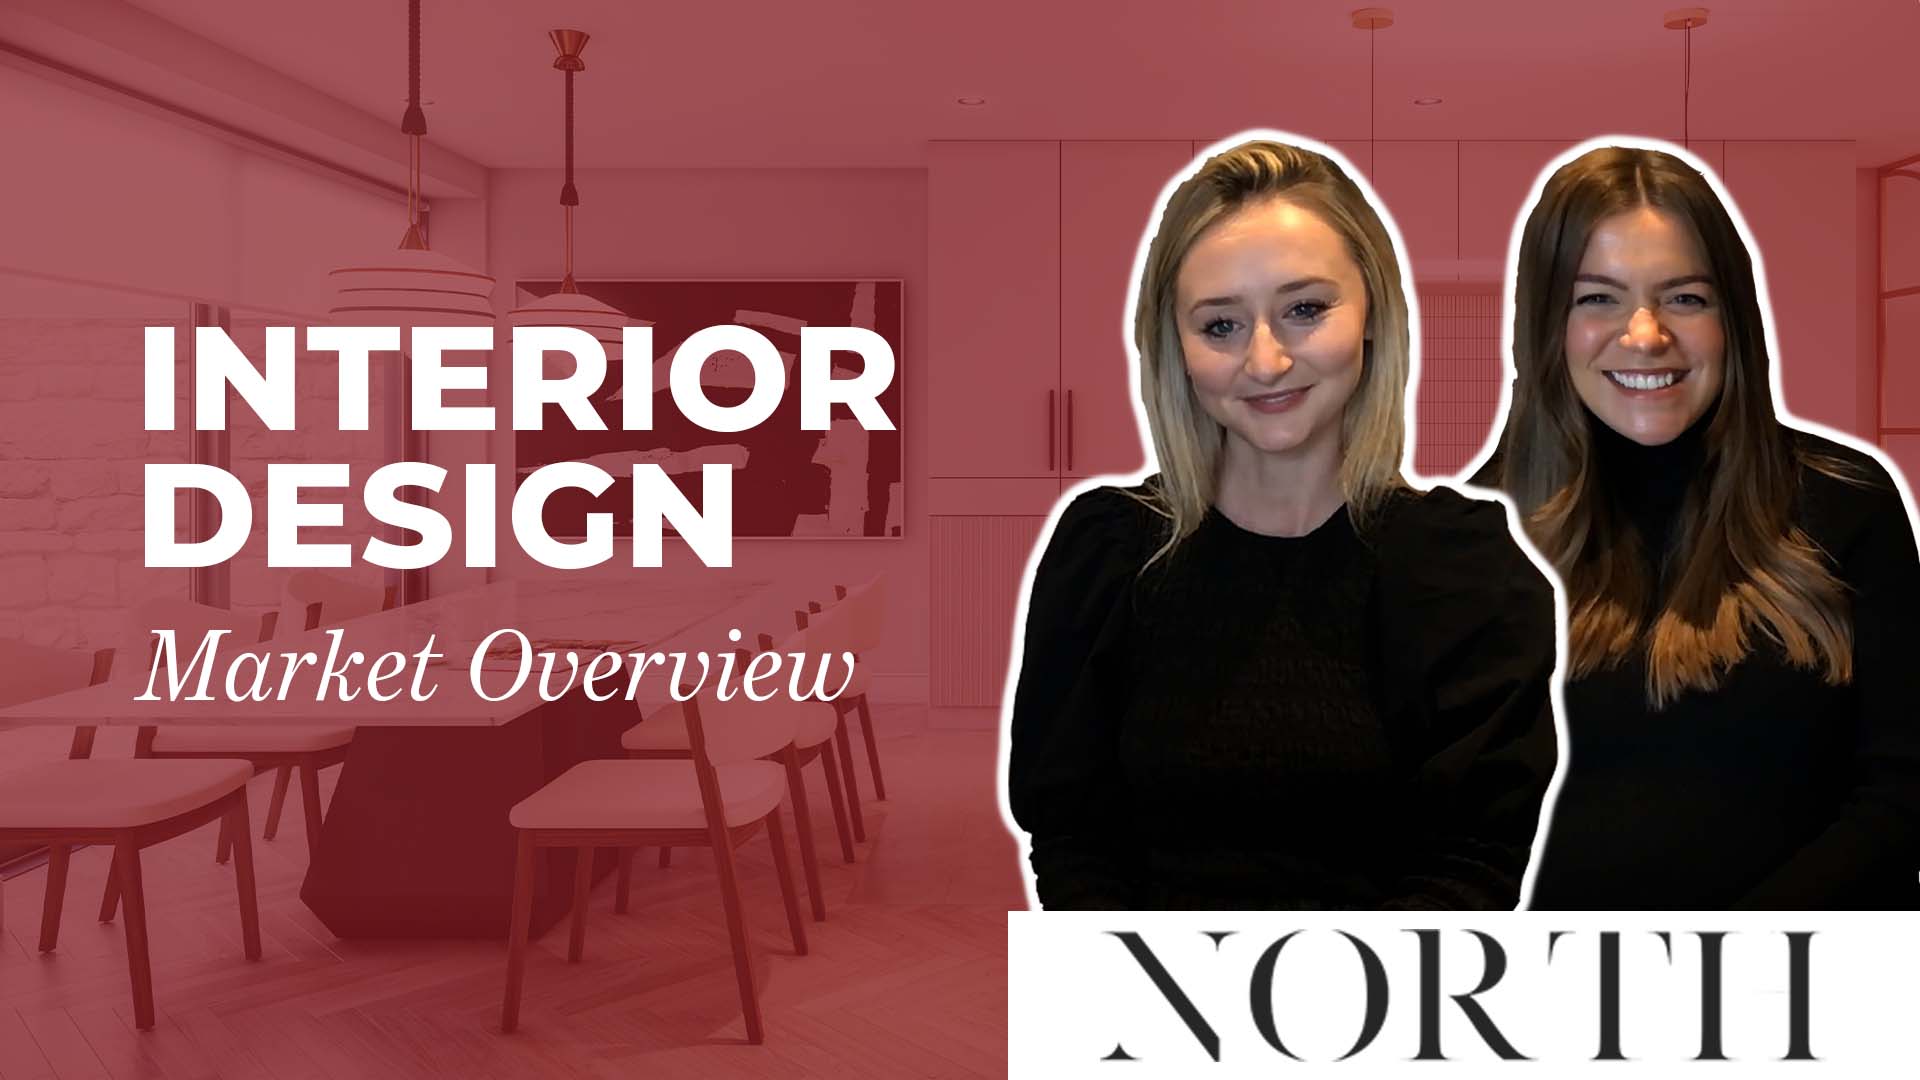 Interior Architecture & Design Market Overview with NORTH | 3D Design Podcast Ep.5